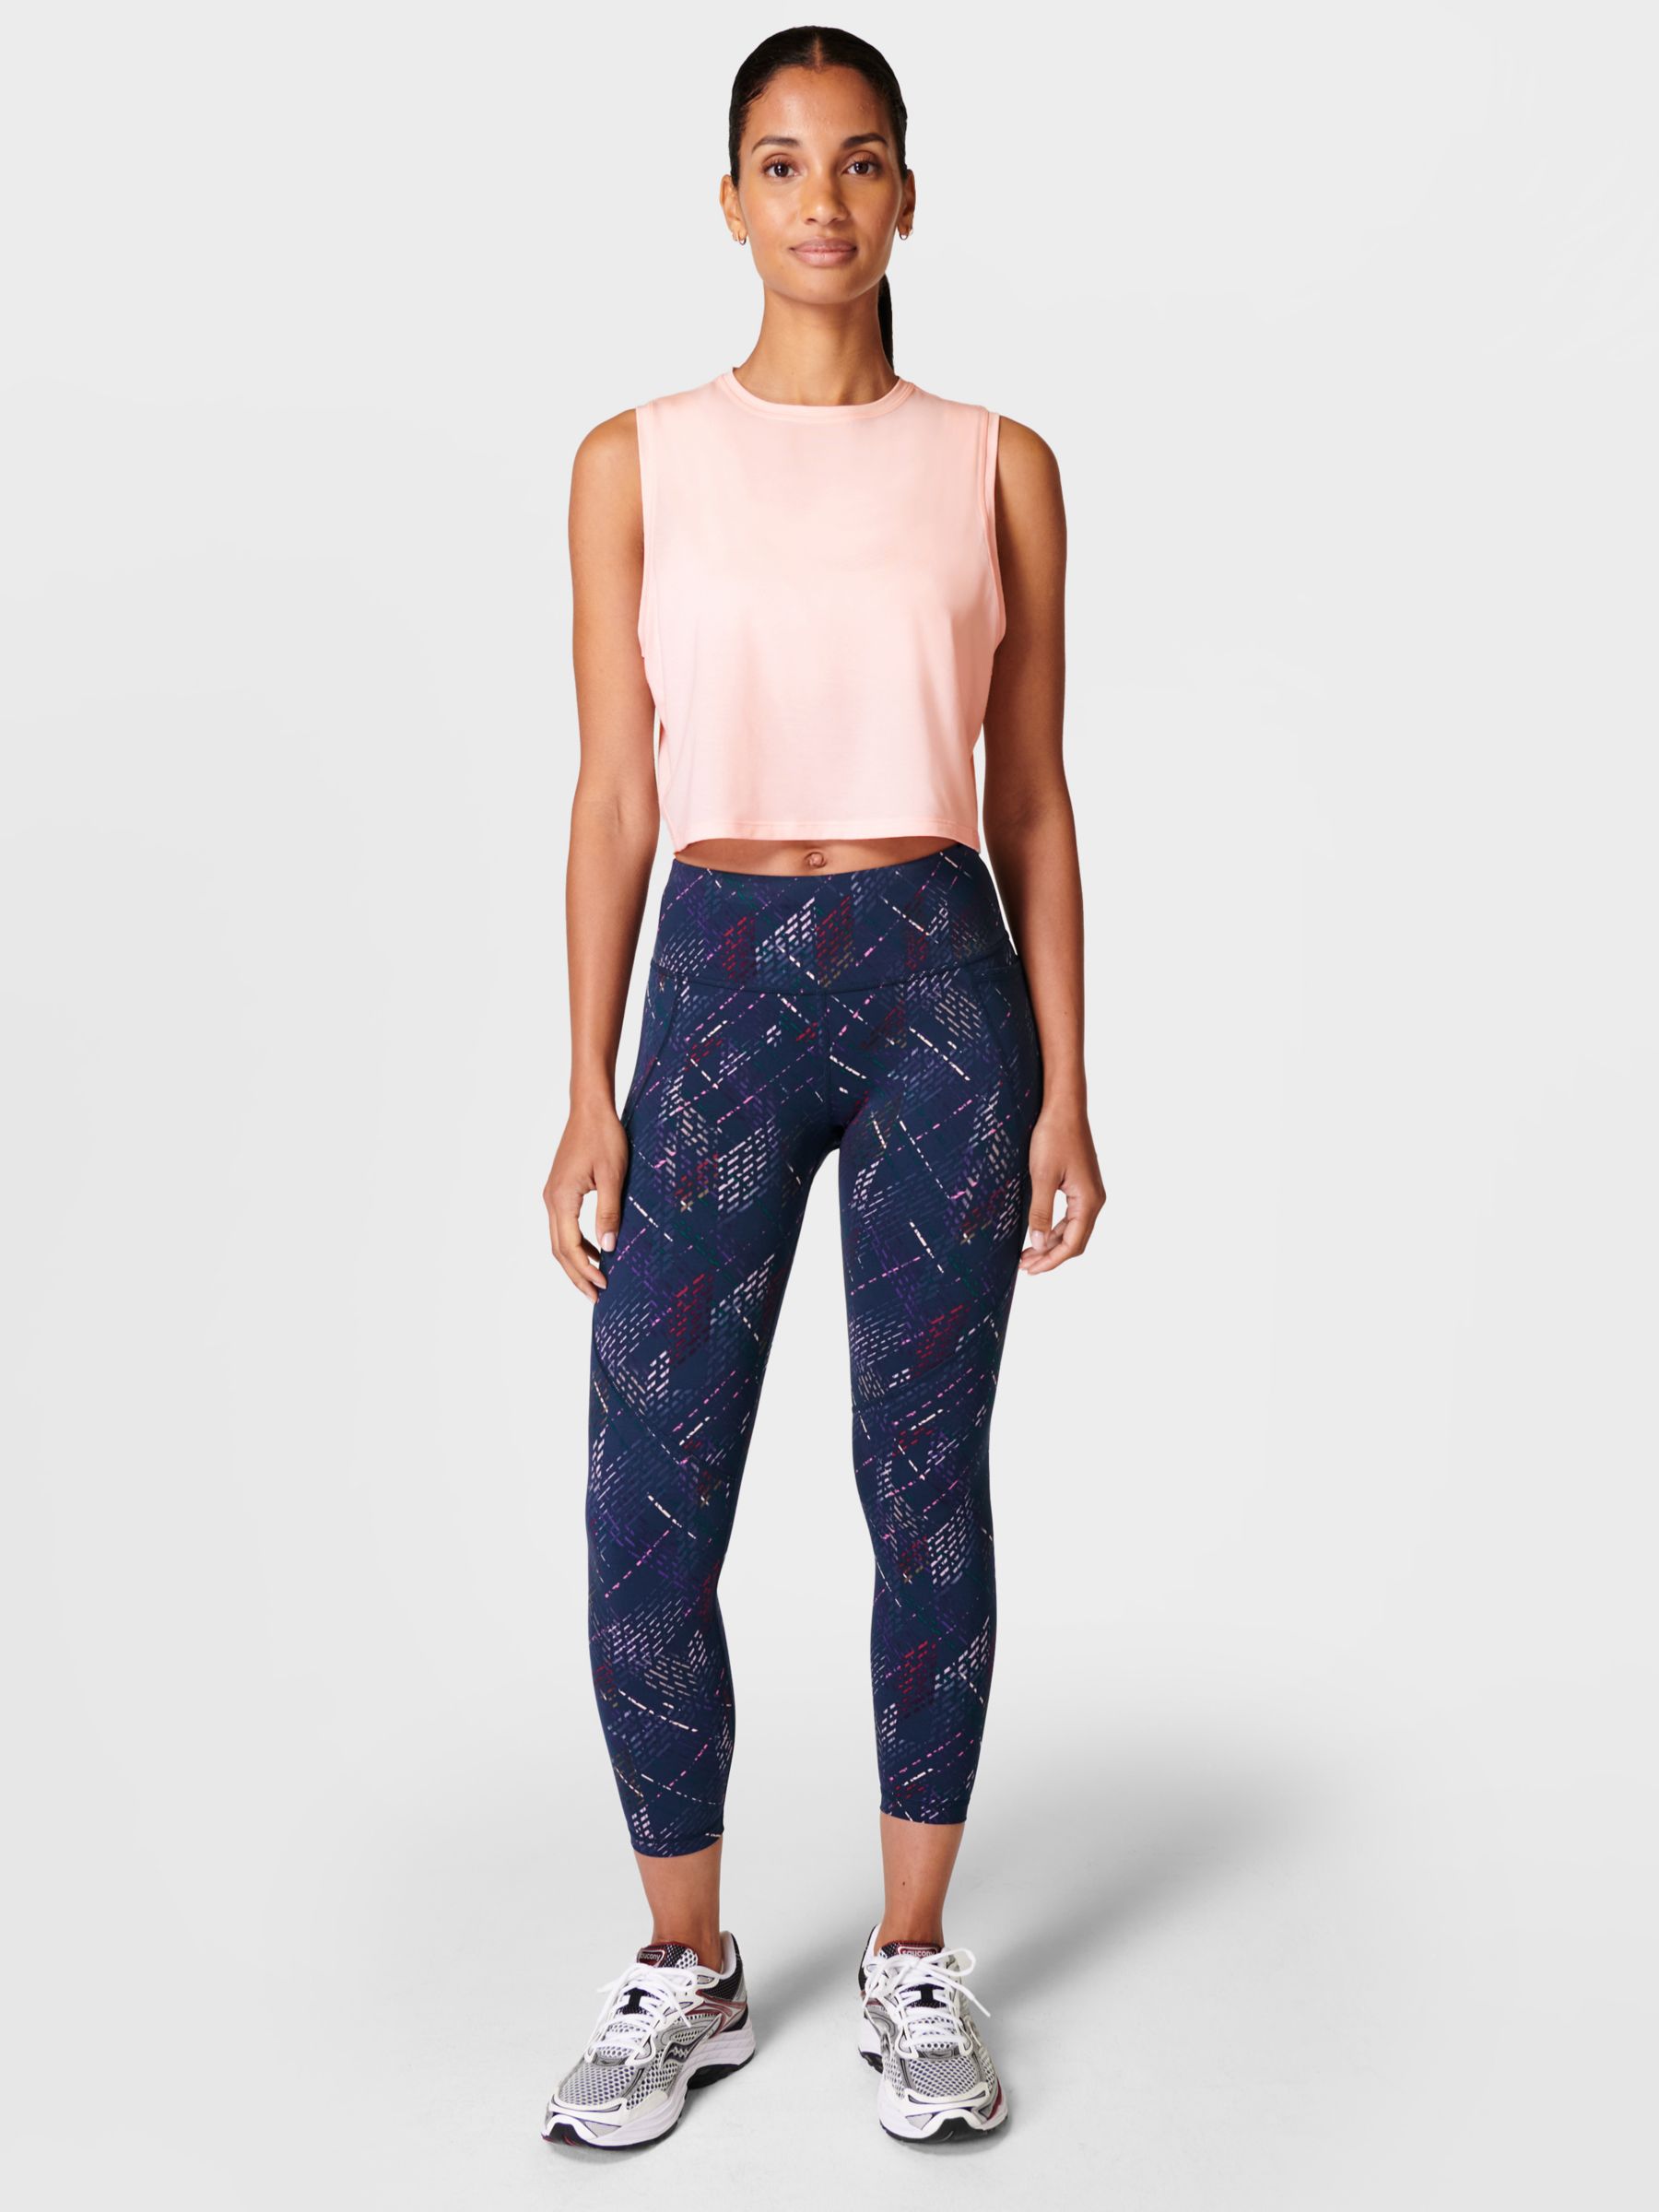 Sweaty Betty Power 7/8 Gym Leggings, Blue Deconstructed Check at